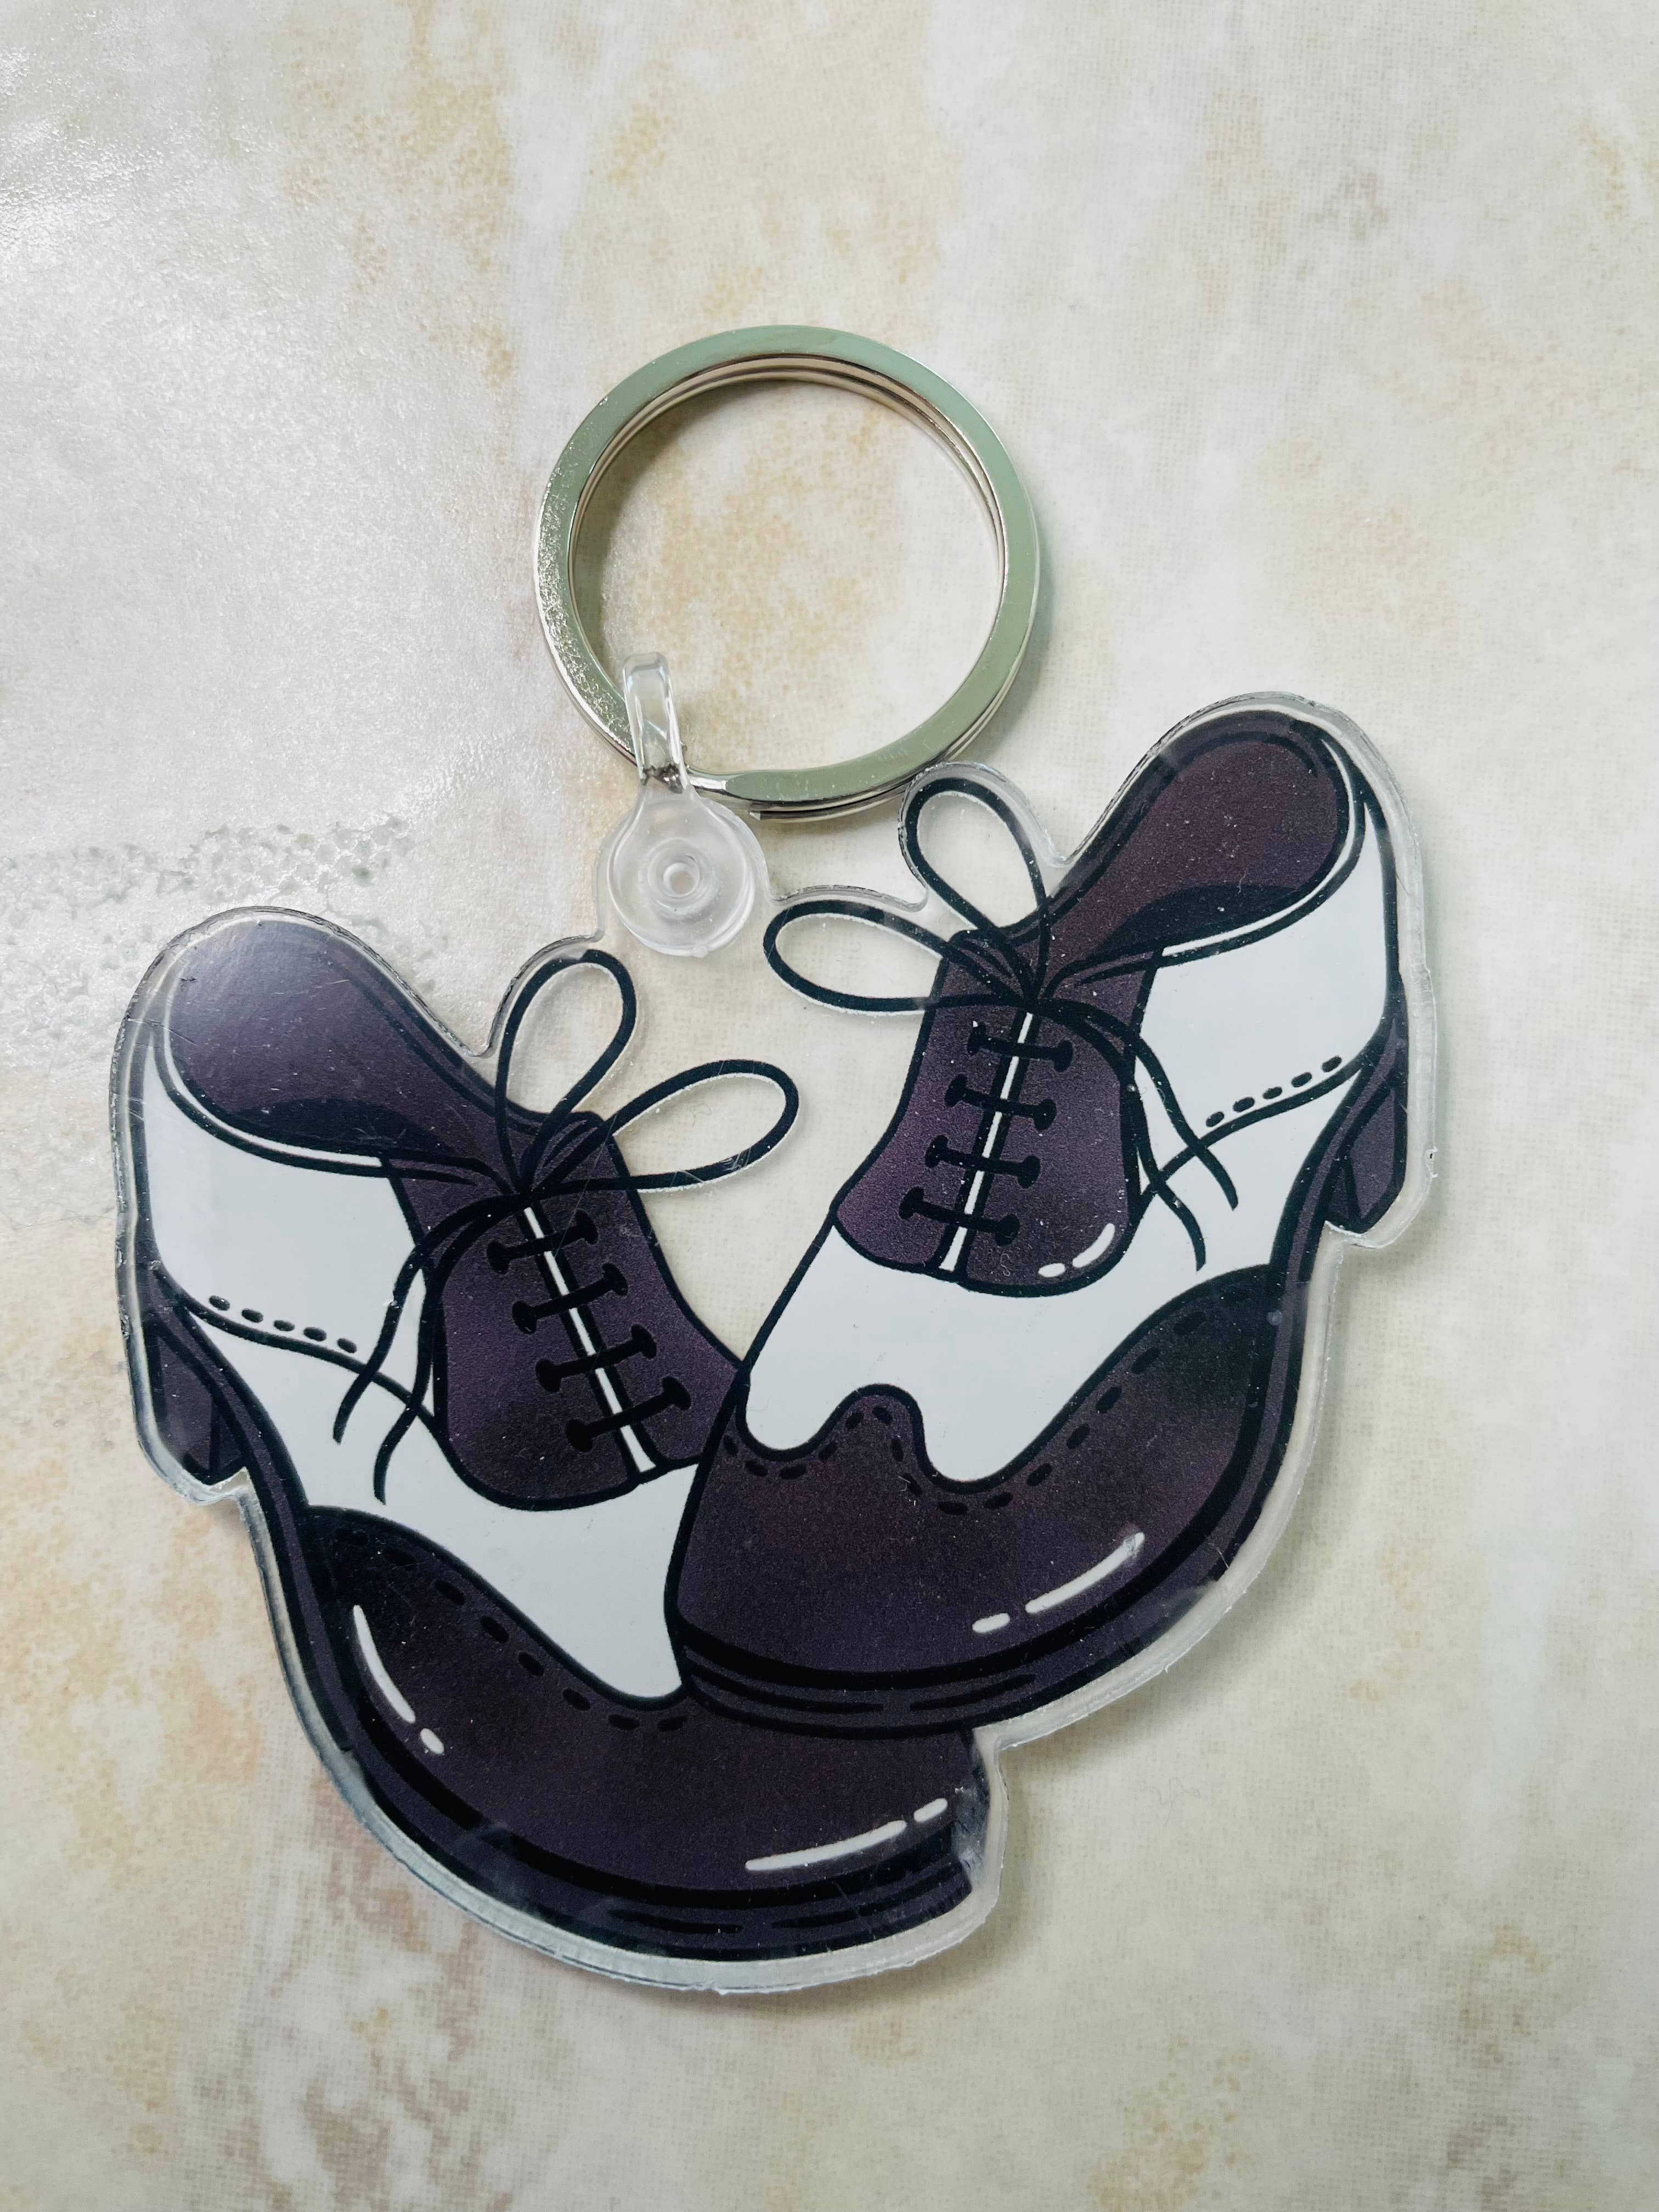 Spectator Tap Shoes Keychain